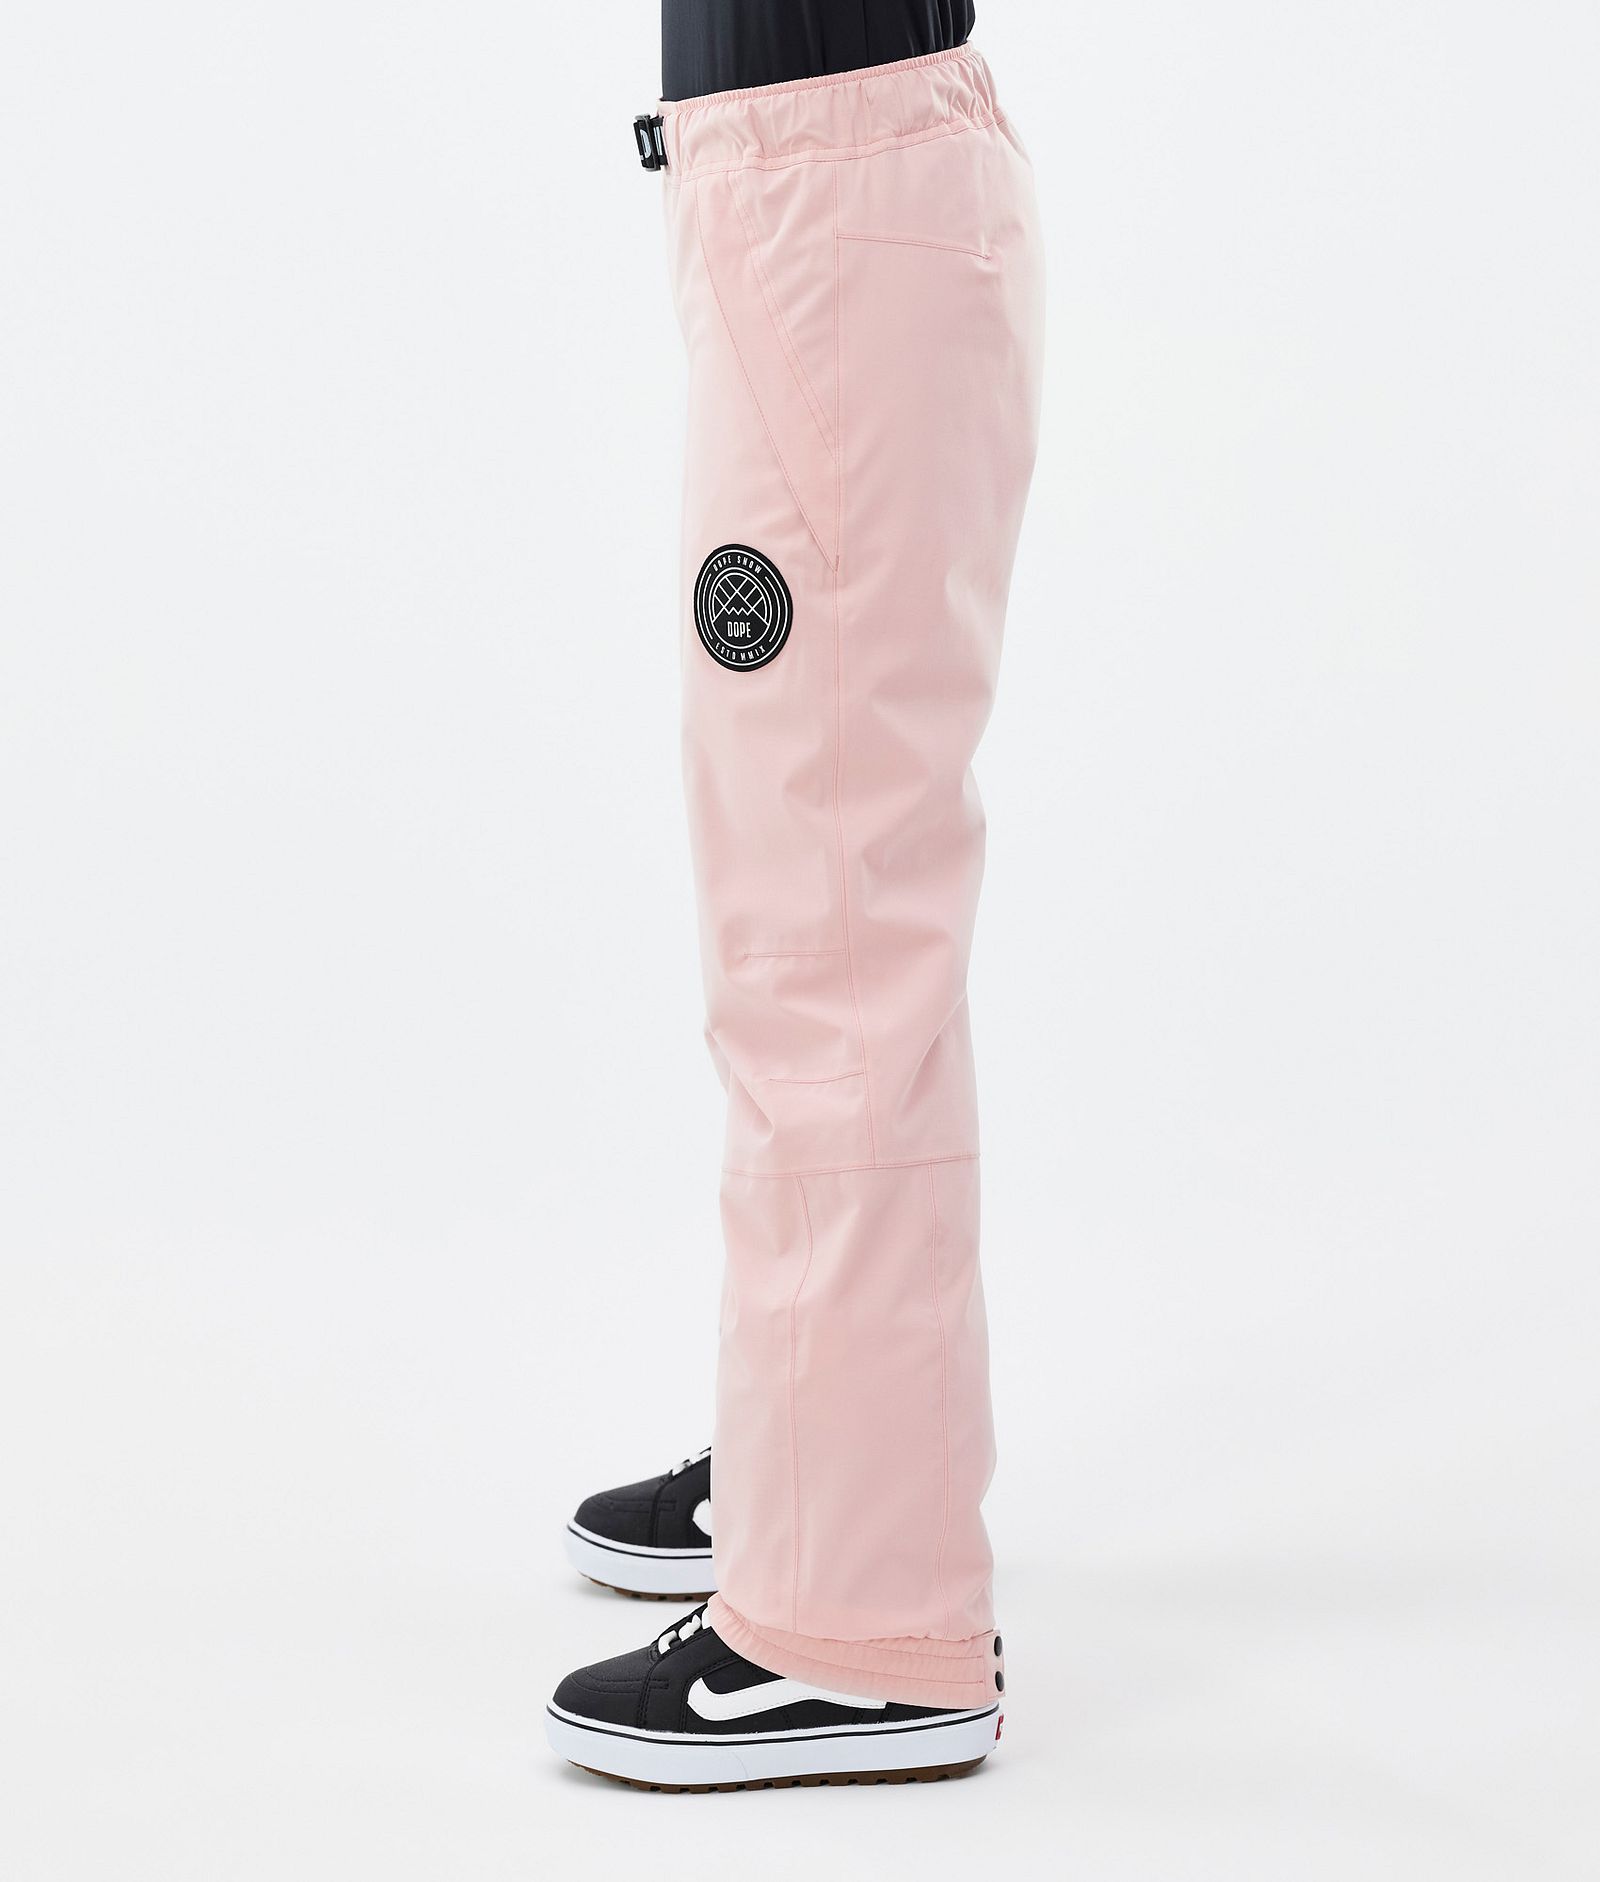 Dope Blizzard W Snowboard Pants Women Soft Pink, Image 3 of 5